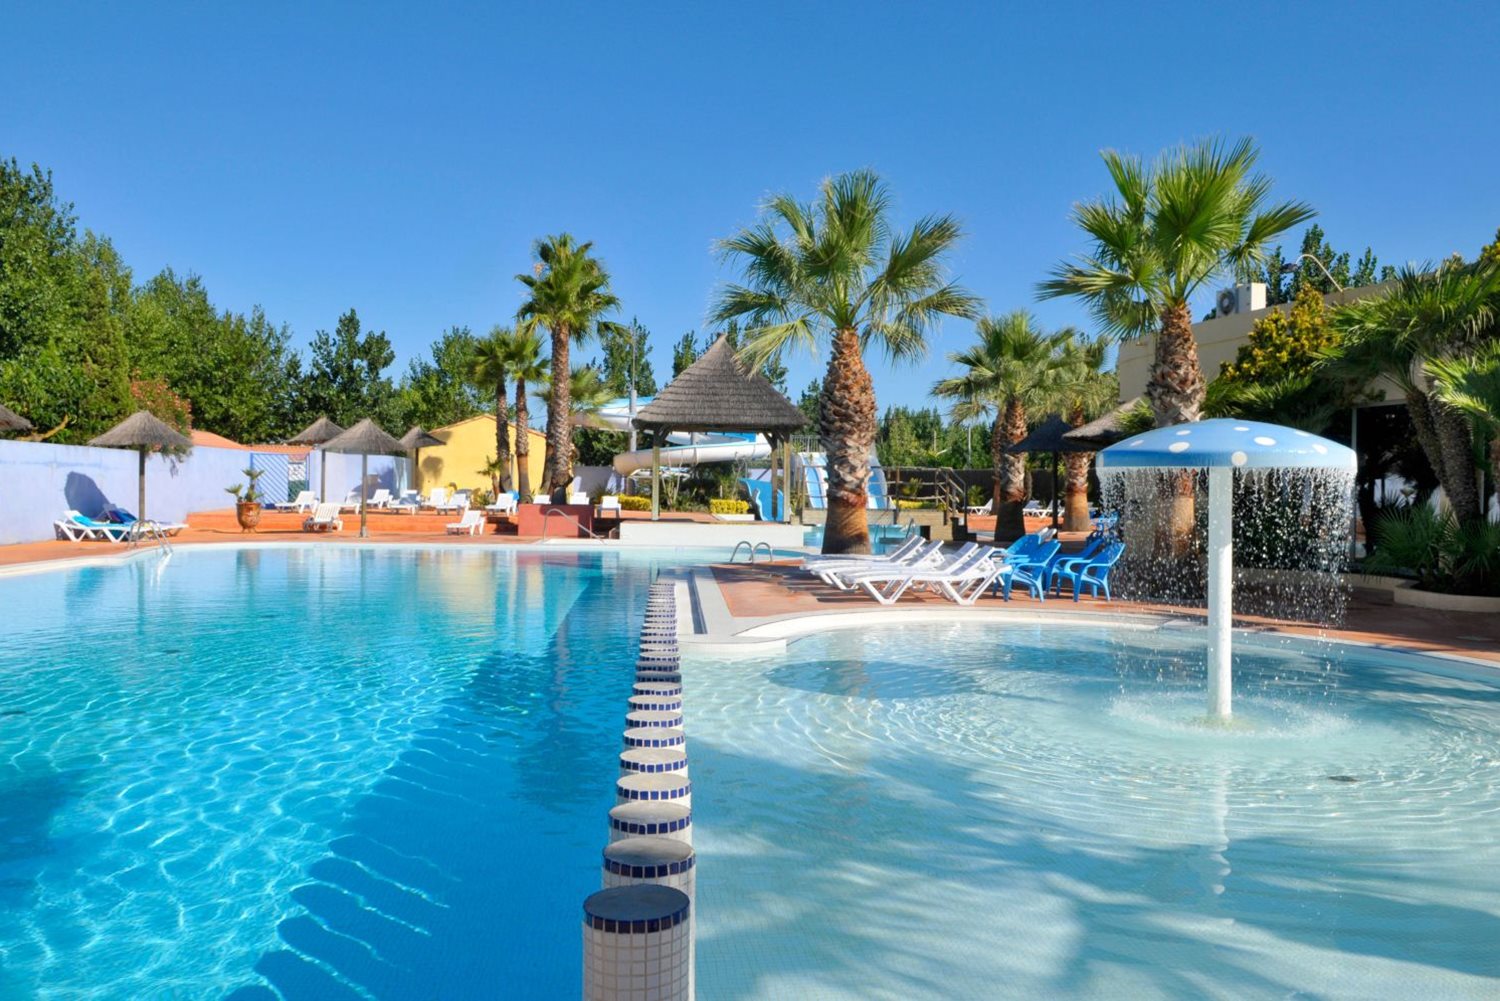 Camping Nouvelle Floride - Holiday Park in Marseillan Plage, Languedoc-Roussillon, France